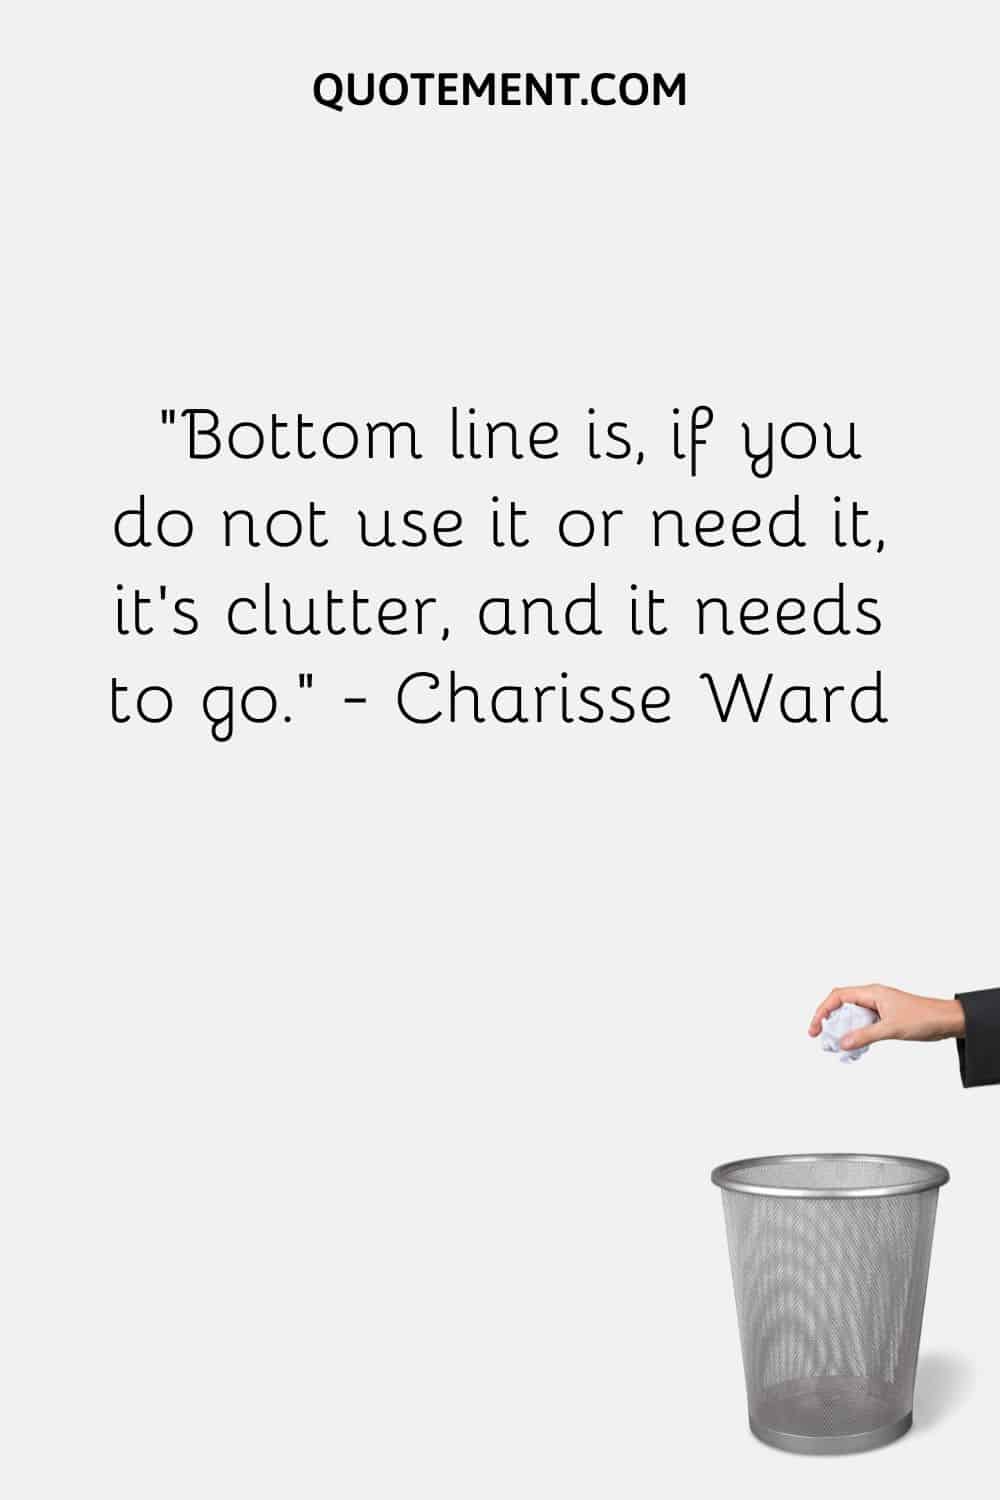 Bottom line is, if you do not use it or need it, it’s clutter, and it needs to go